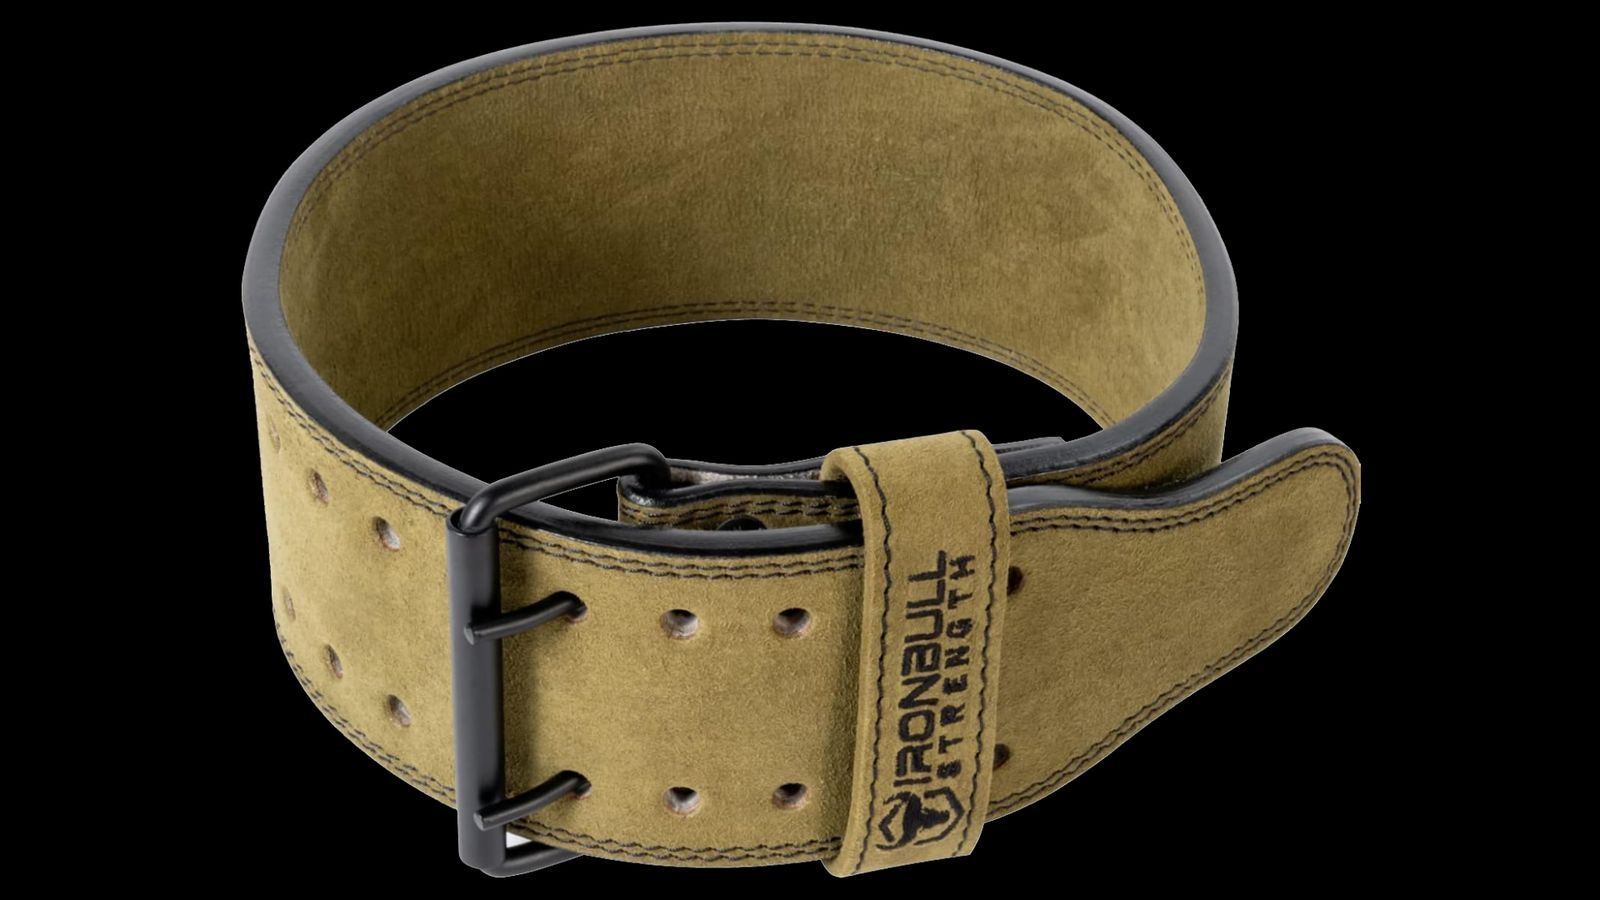 Iron Bull Strength product image of a khaki green suede leather belt.